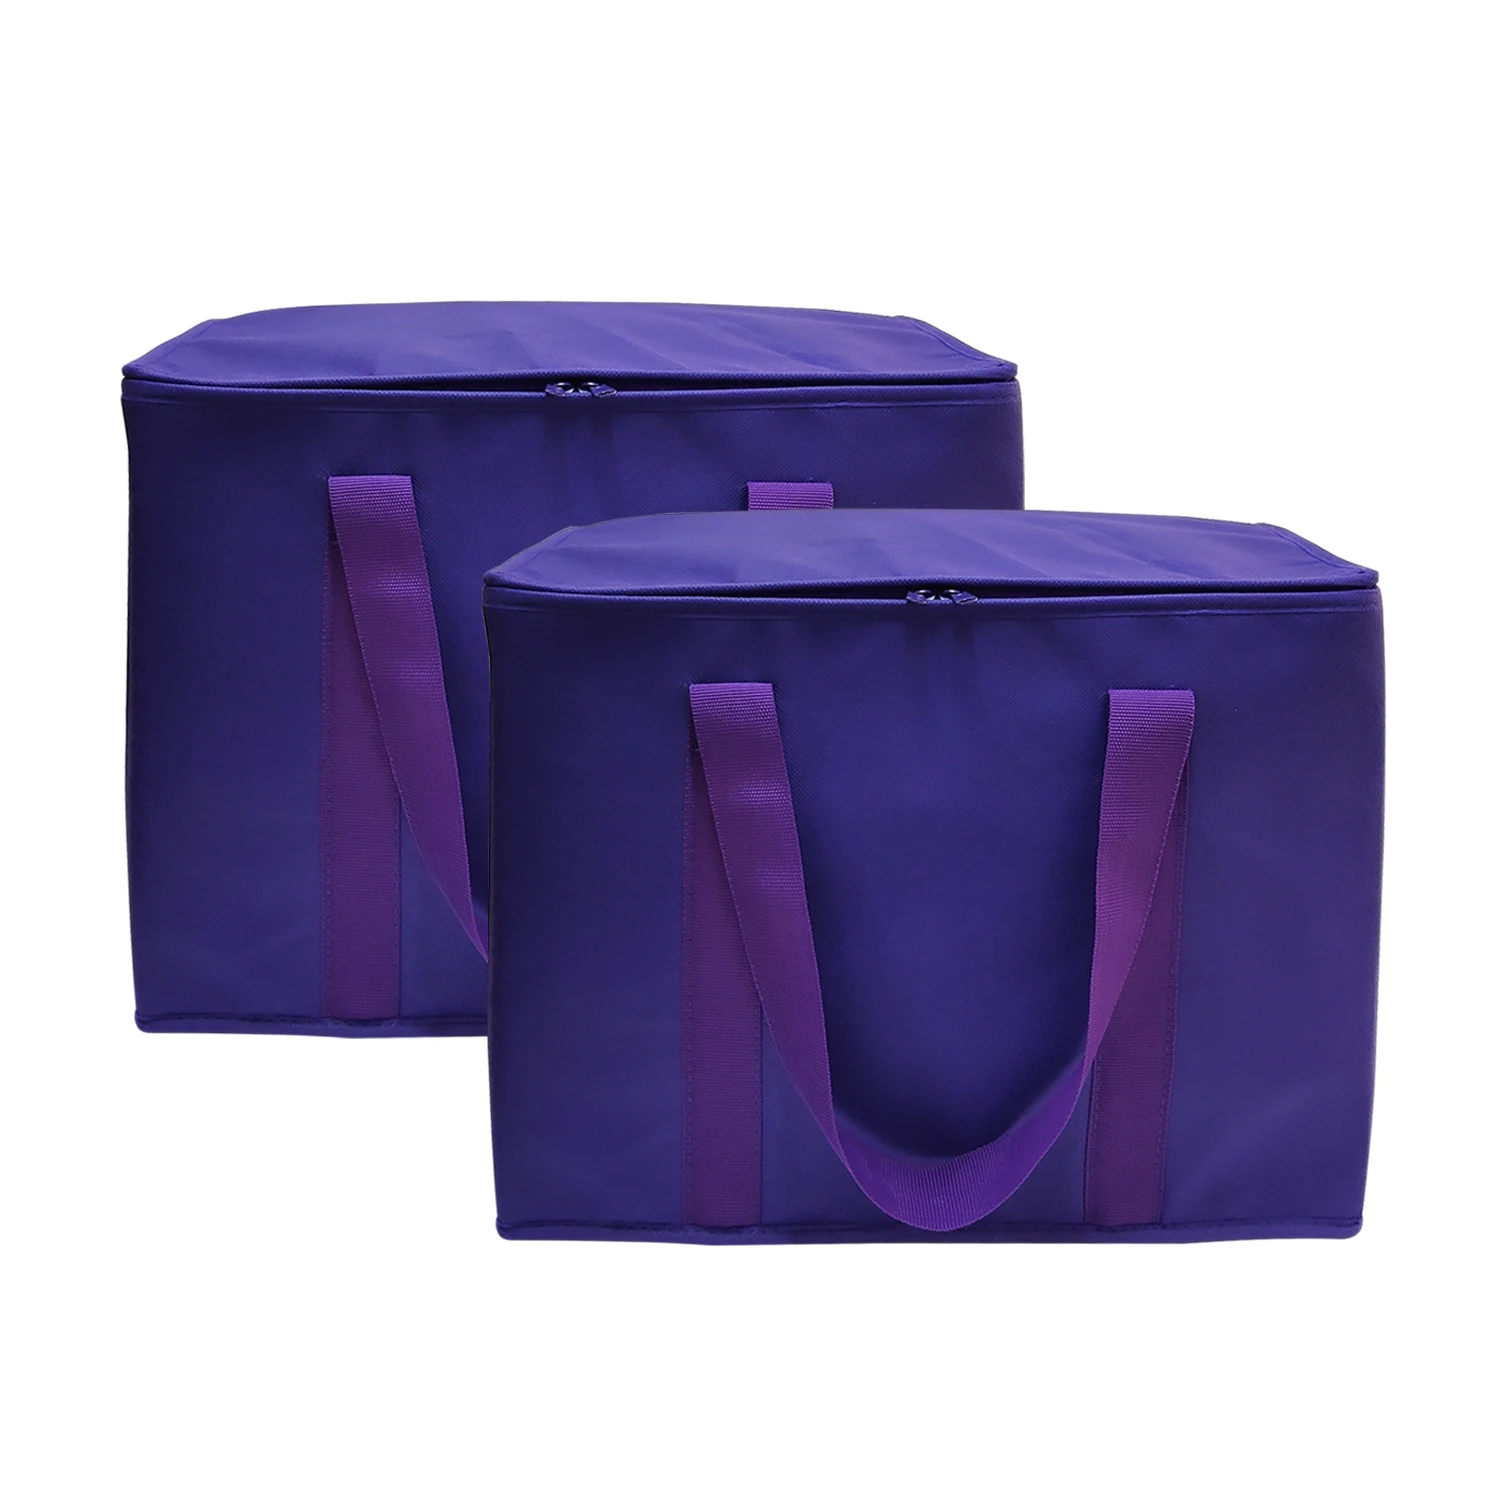 2 pack Insulated Reusable Grocery Shopping/Delivery Bags with Zippered Top Set 